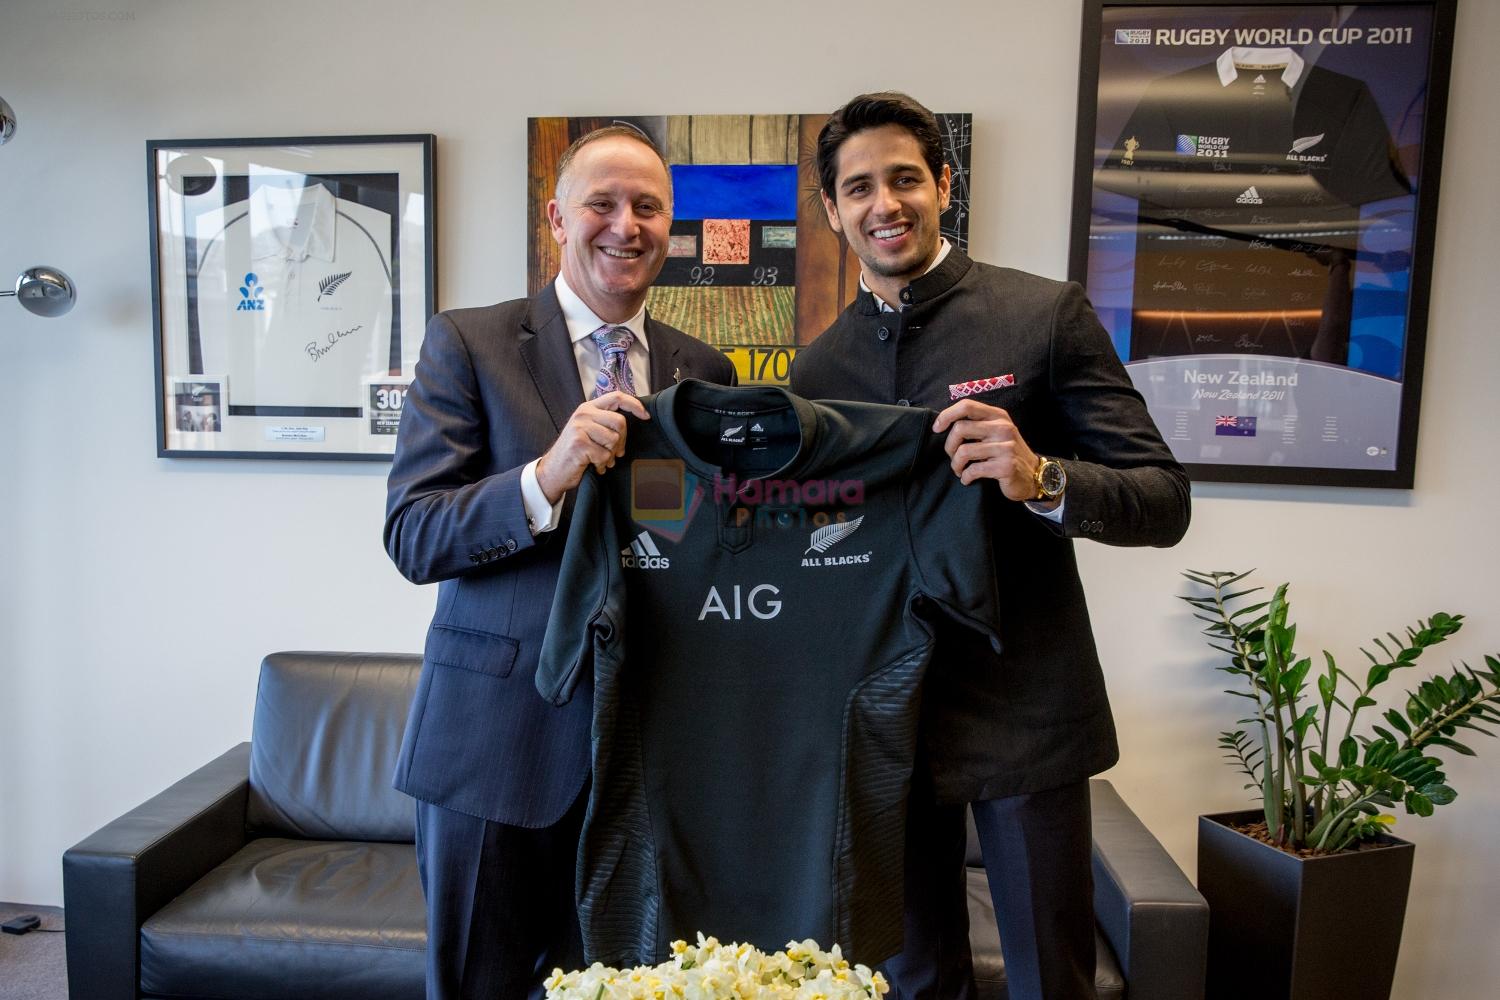 Sidharth Malhotra is bestowed high honour by the Prime Minister of New Zealand Mr. John Key on 12th Oct 2015